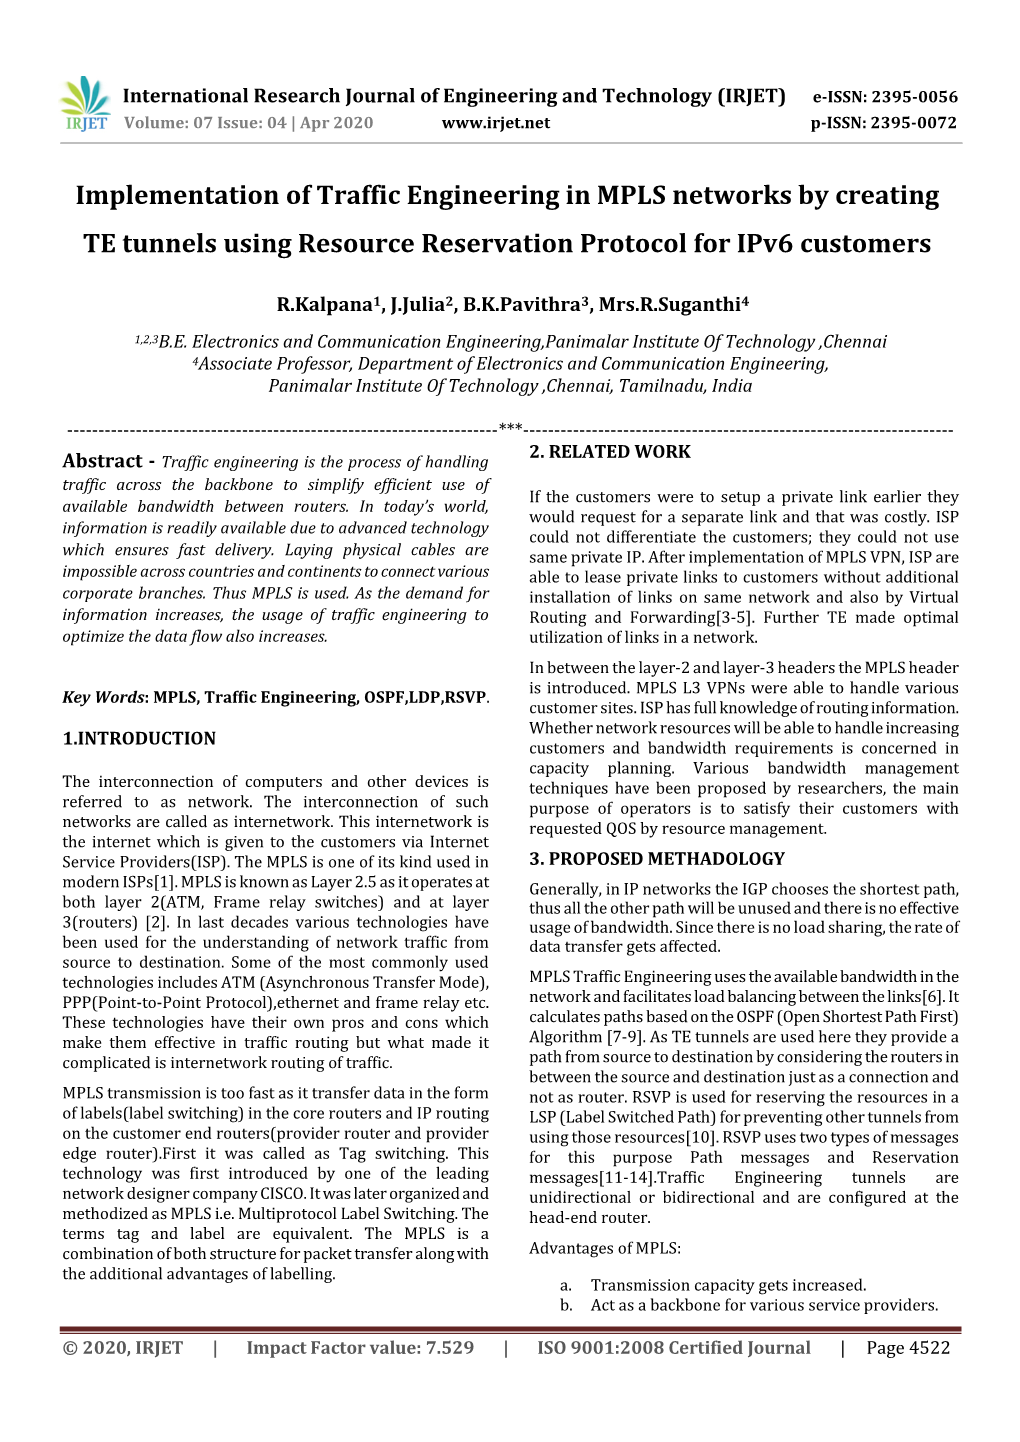 Implementation of Traffic Engineering in MPLS Networks by Creating TE Tunnels Using Resource Reservation Protocol for Ipv6 Customers